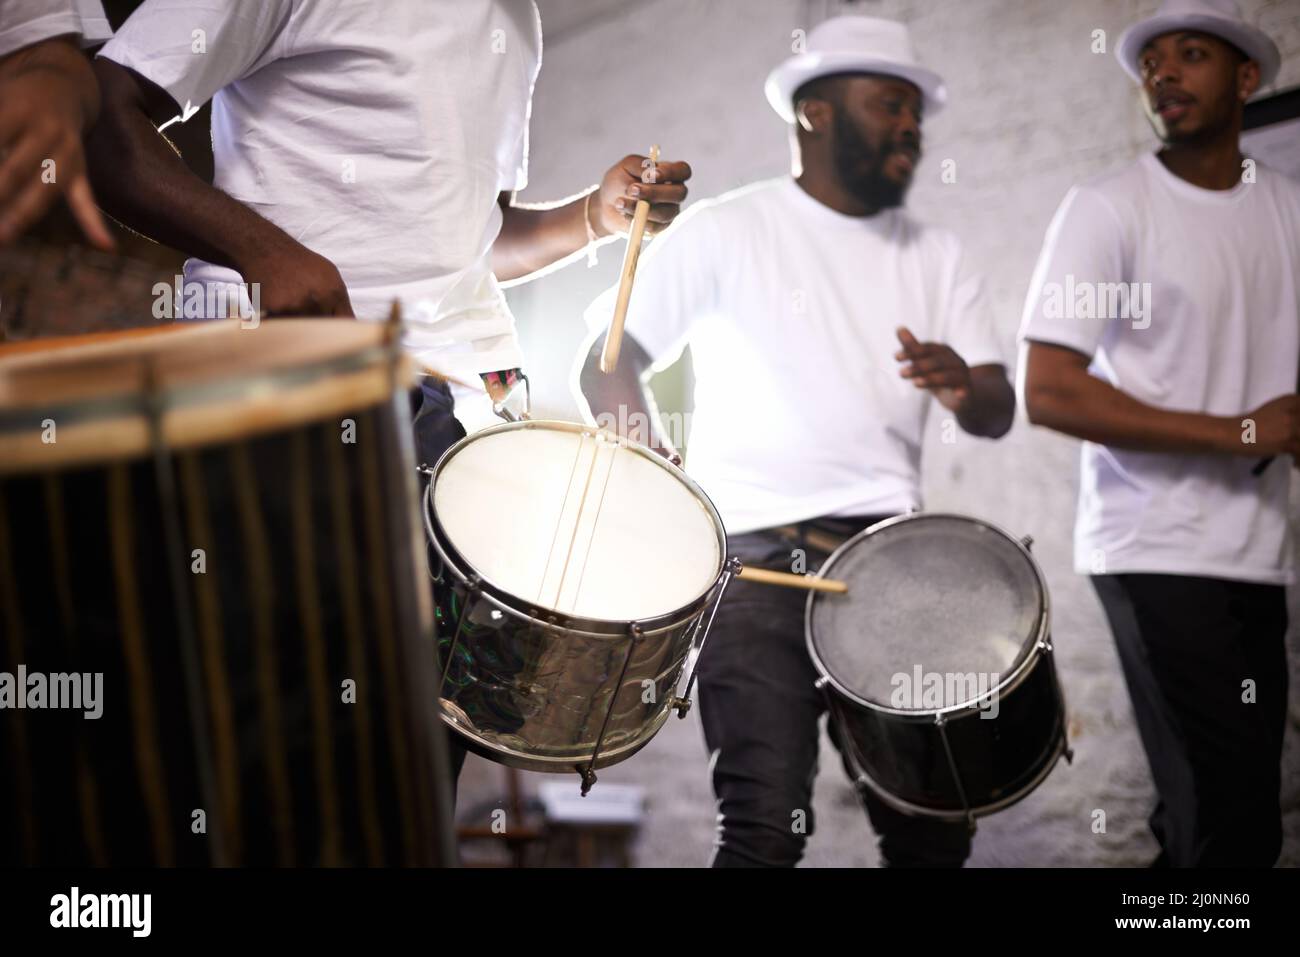 Feel the rhythm of the carnival. Shot of a band playing their percussion instruments in a Brazilian setting. Stock Photo